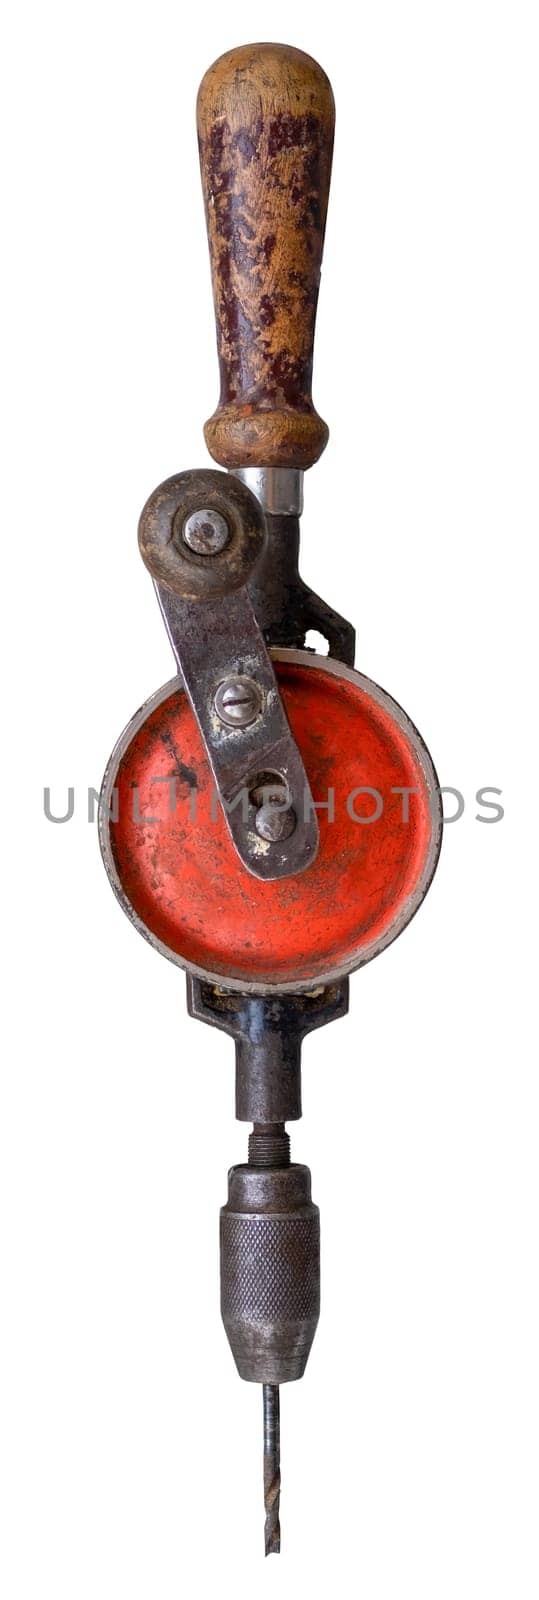 Rustic Vintage Hand Drill Isolated On A White Background